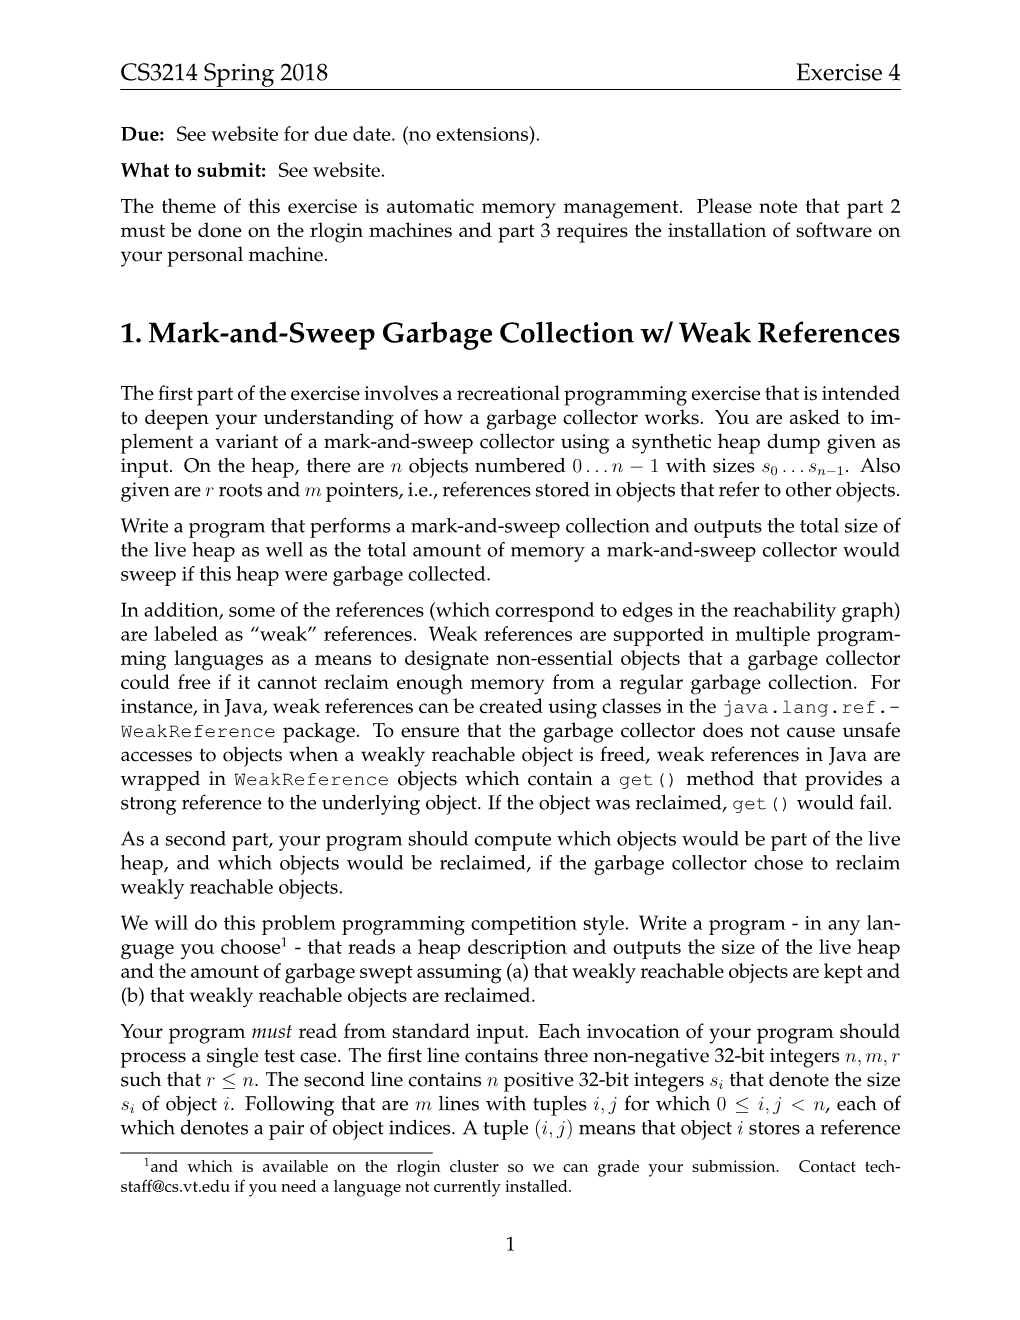 1. Mark-And-Sweep Garbage Collection W/ Weak References